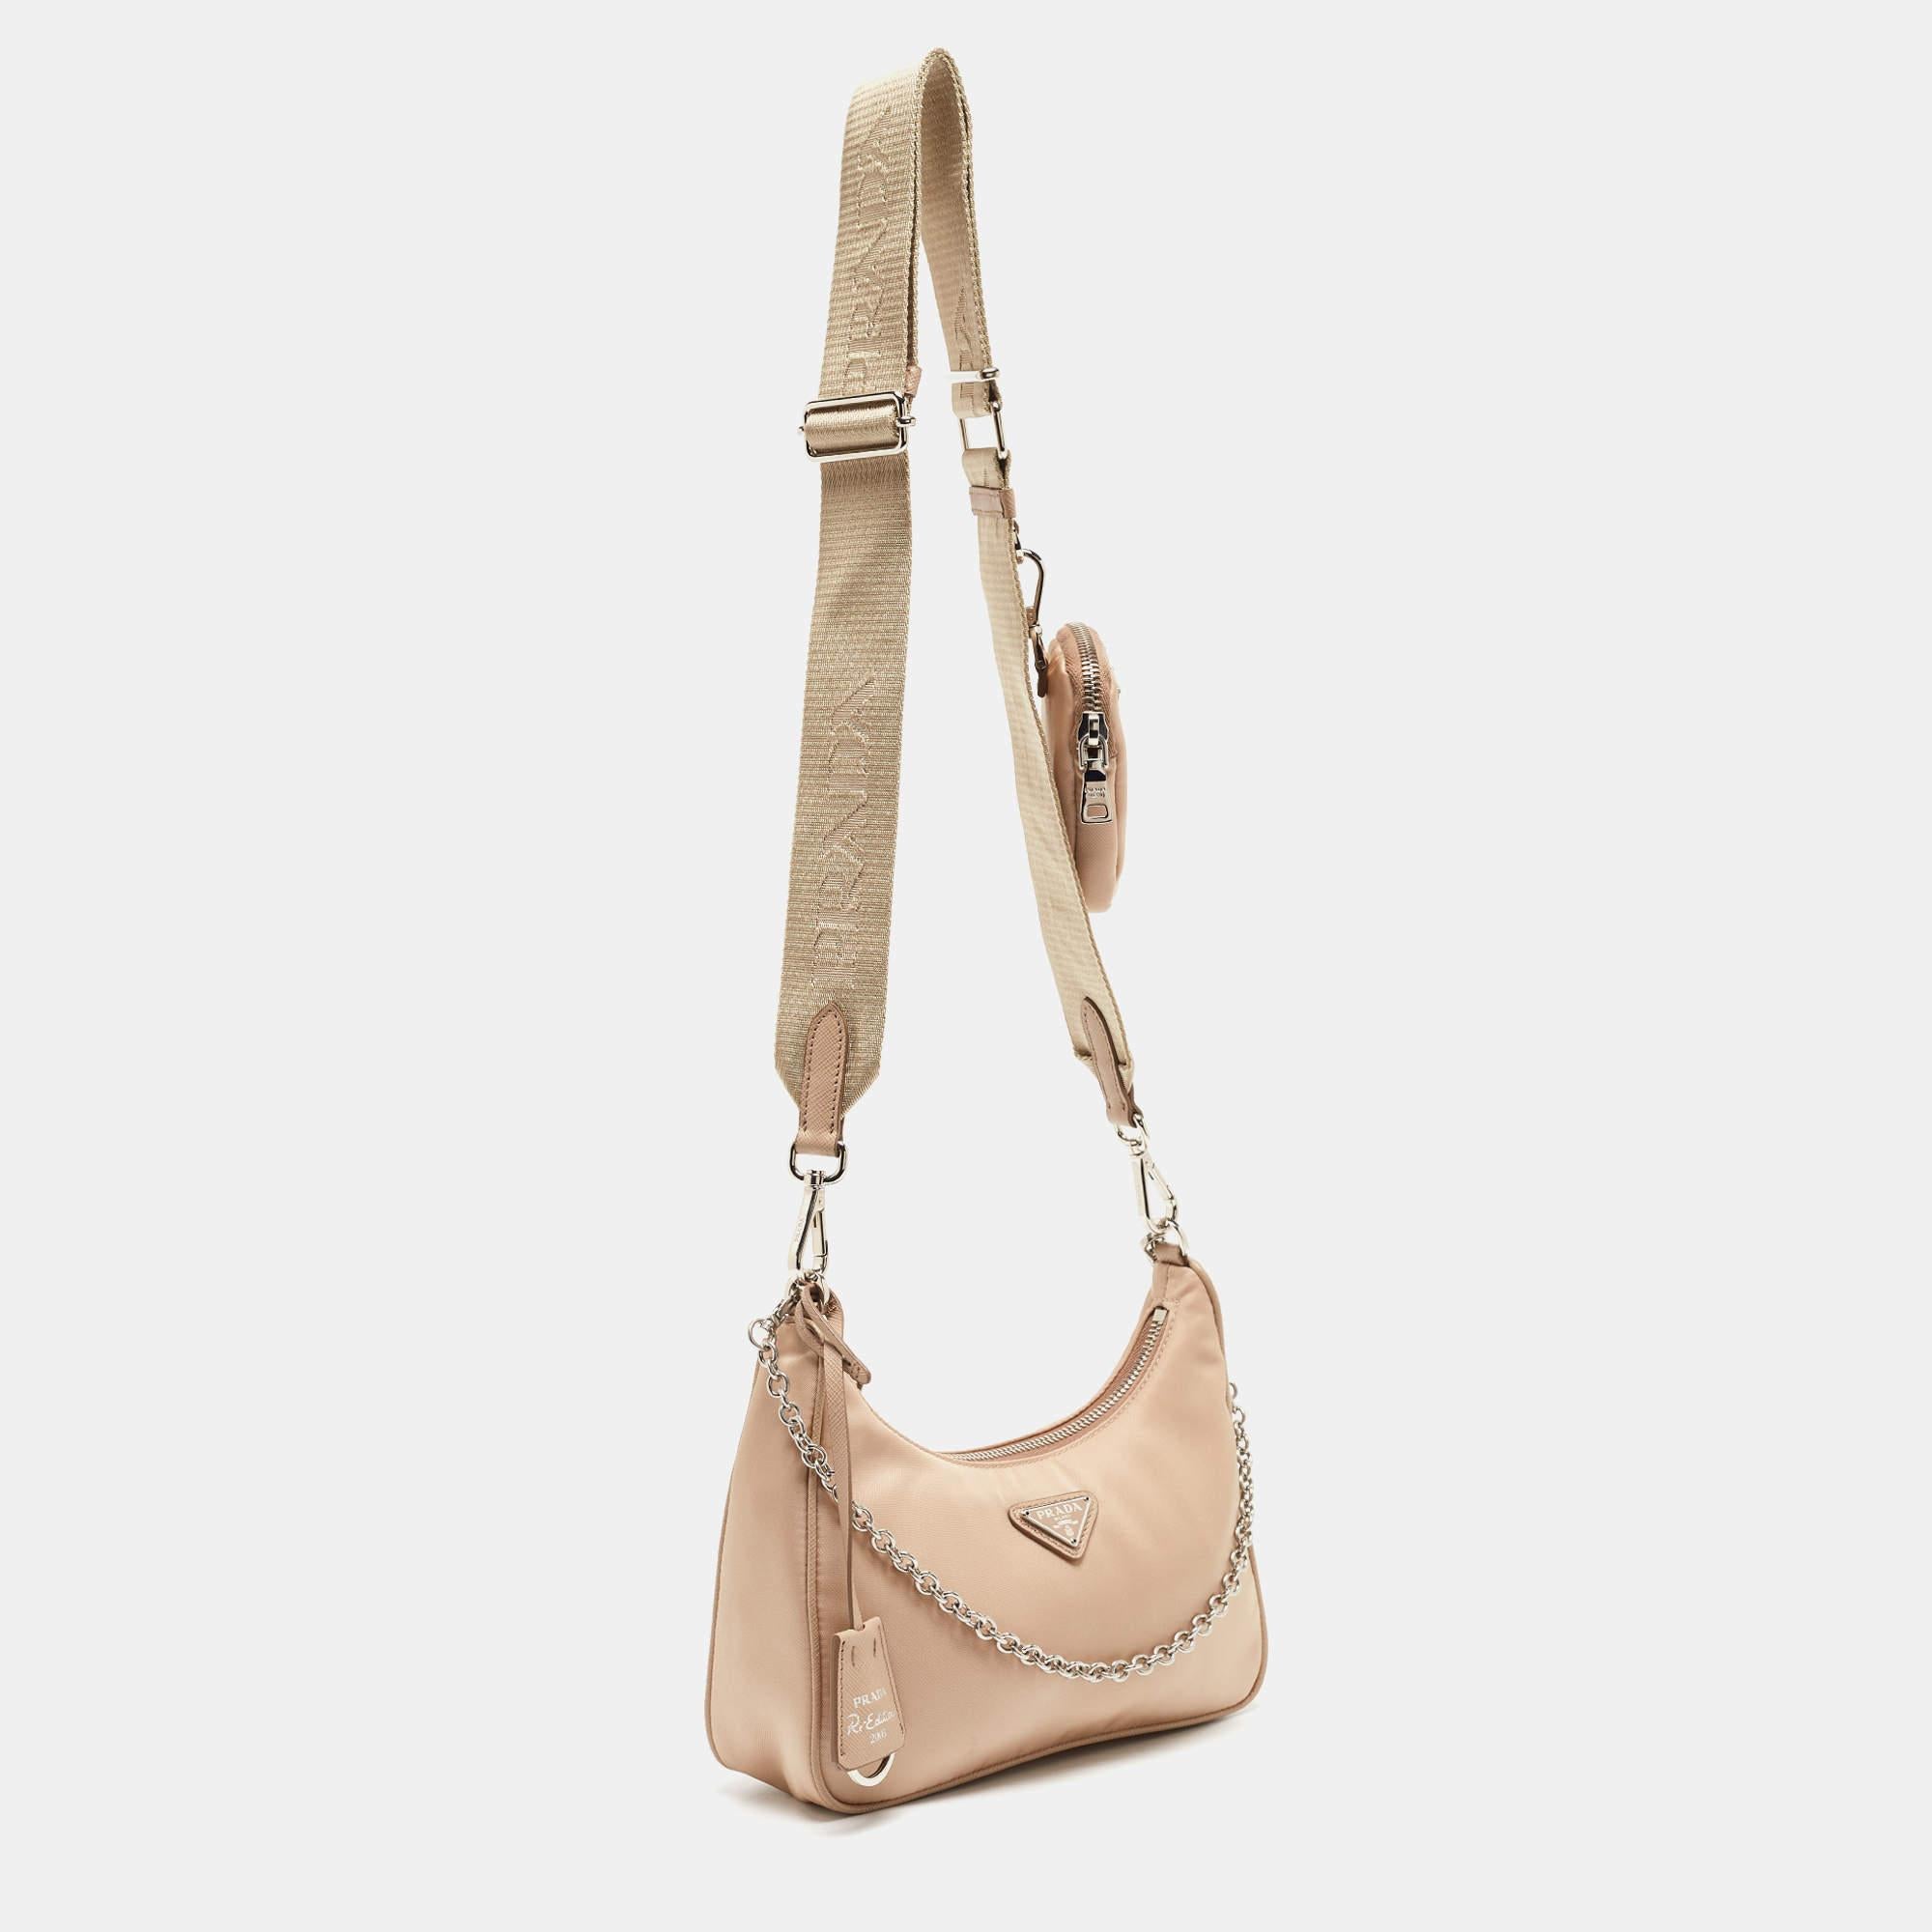 Designer bags are ideal companions for ample occasions! Here we have a fashion-meets-functionality piece crafted with precision. It has been equipped with a well-sized interior that can easily fit all your essentials.

Includes: Detacheable Strap,